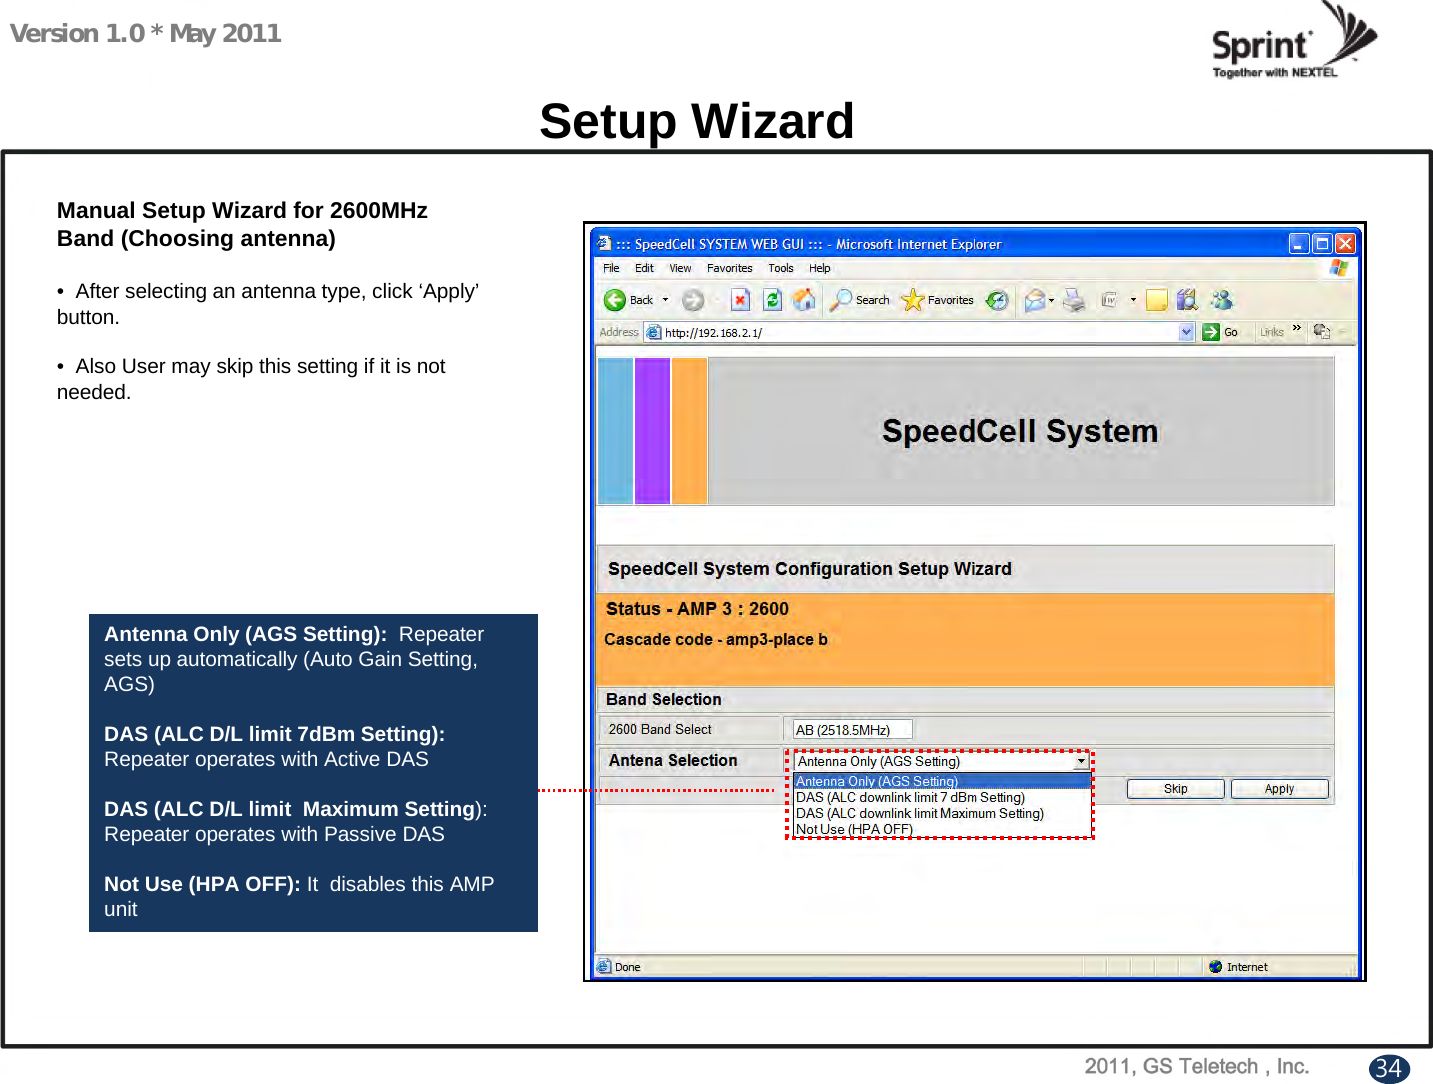 Version 1.0 * May 2011Setup WizardManual Setup Wizard for 2600MHz Band (Choosing antenna)• After selecting an antenna type, click ‘Apply’button.• Also User may skip this setting if it is not needed. Antenna Only (AGS Setting):  Repeater sets up automatically (Auto Gain Setting, AGS)DAS (ALC D/L limit 7dBm Setting): Repeater operates with Active DASDAS (ALC D/L limit  Maximum Setting): Repeater operates with Passive DASNot Use (HPA OFF): It  disables this AMP unit34